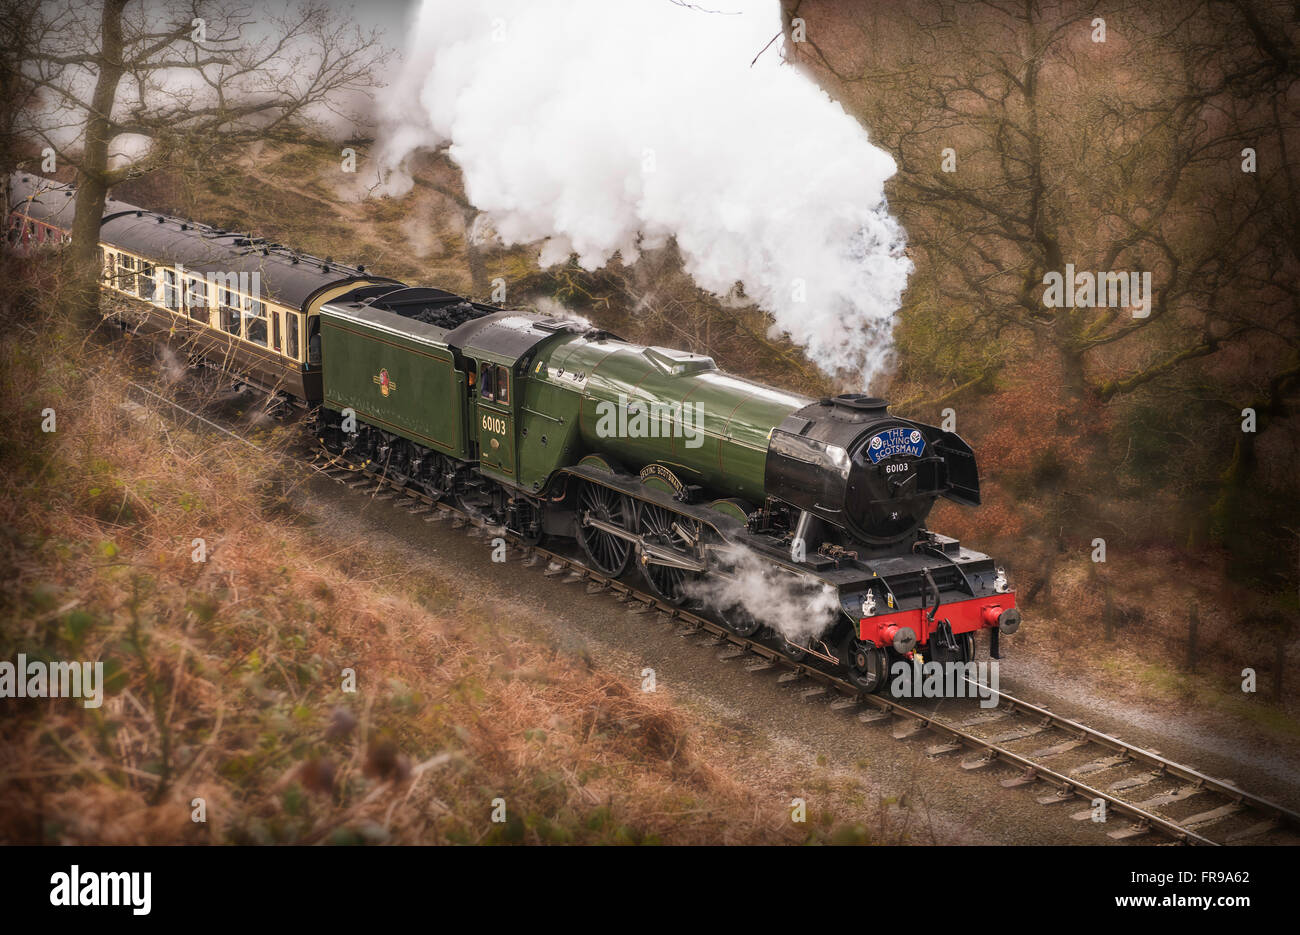 The Flying Scotsman traveling between Grosmont and Goathland on the North Yorkshire Moors heritage railway. Stock Photo